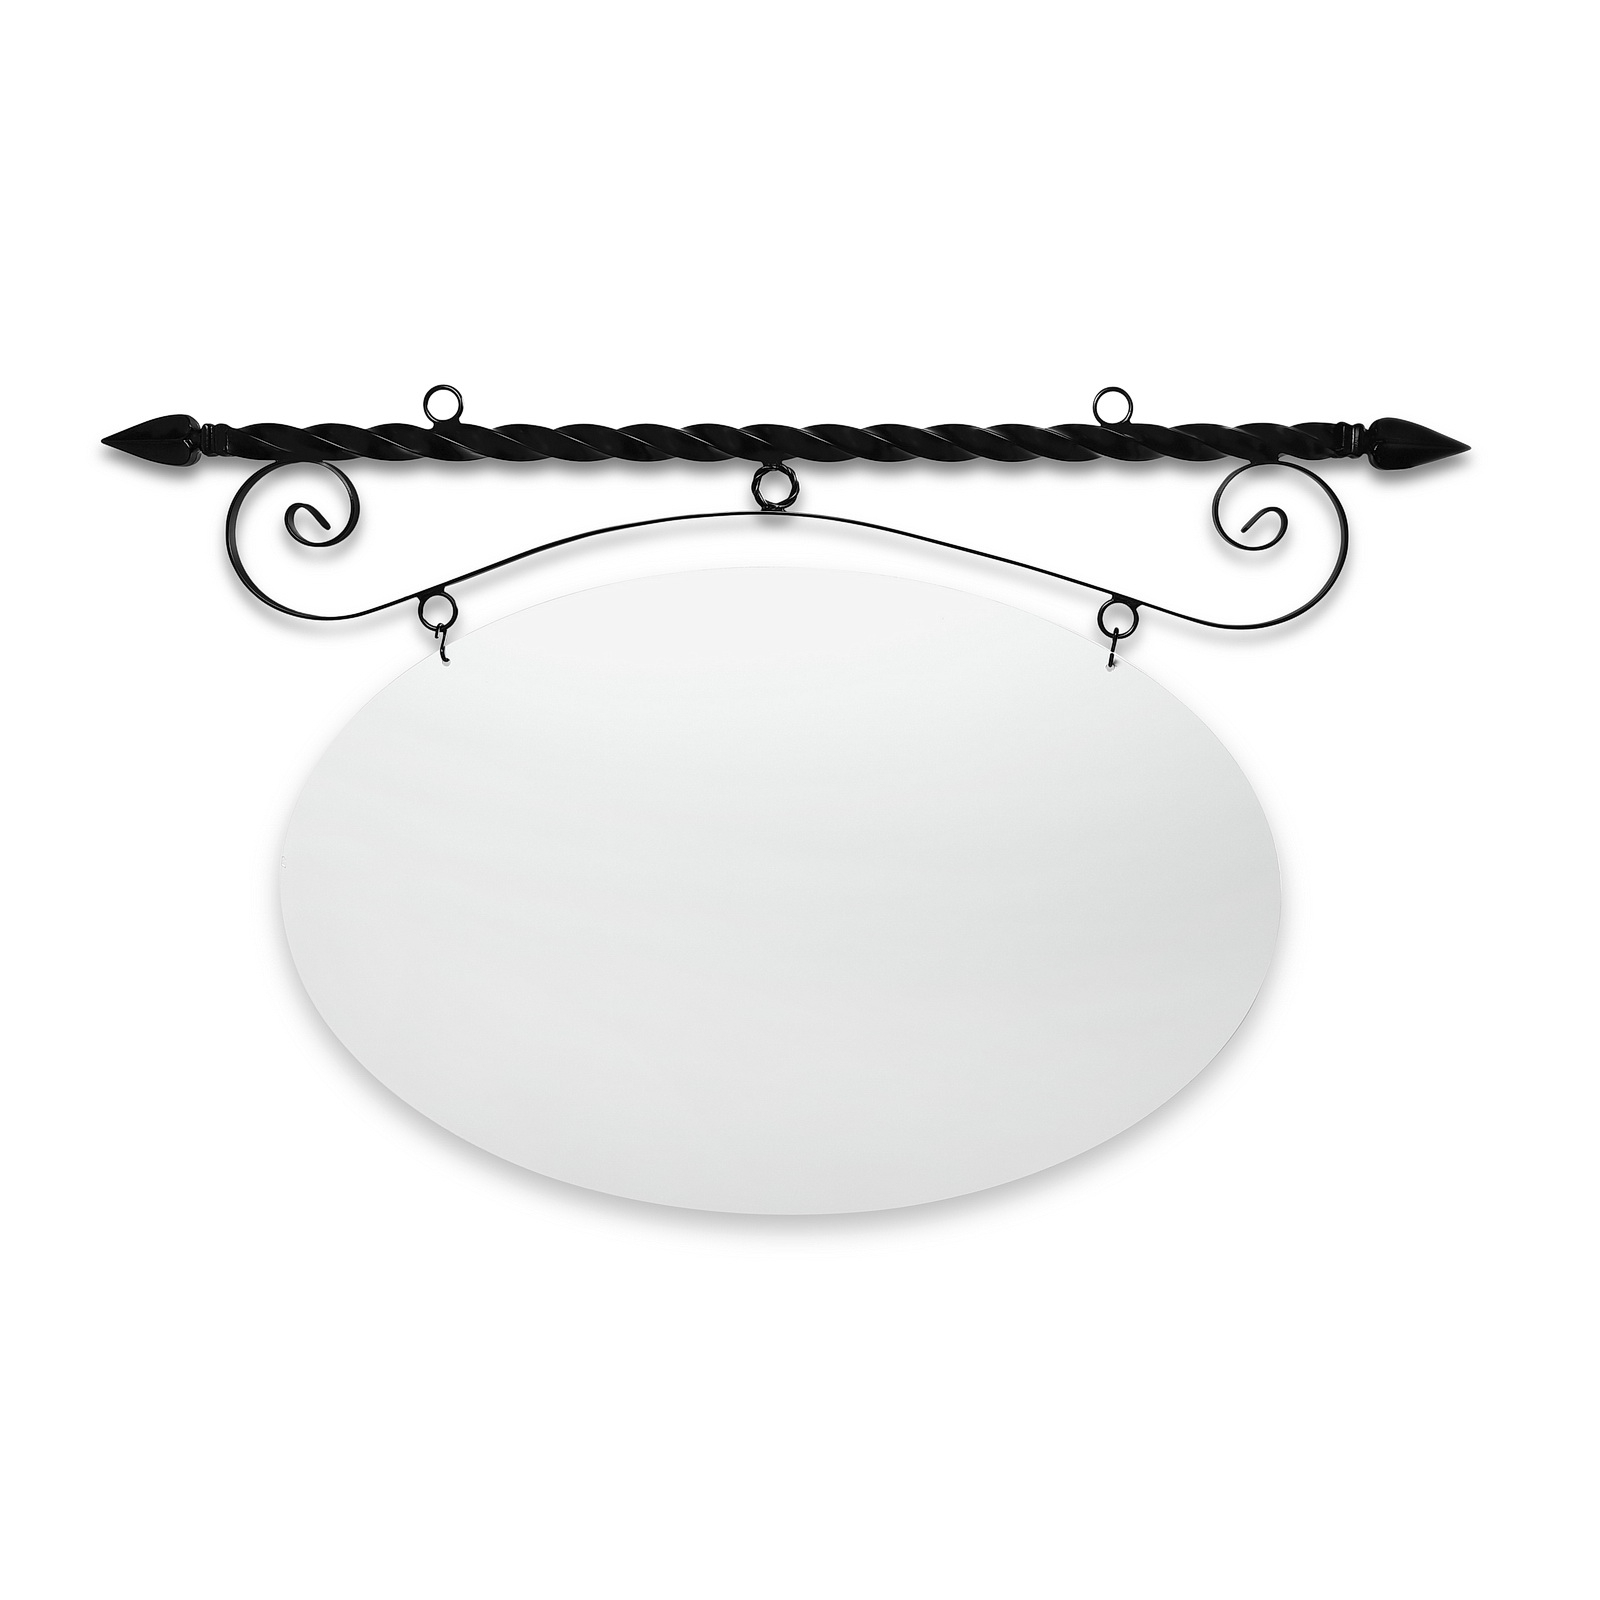 48'' Wide Ceiling Mount Bracket in  Black Powder Coated Steel with 30'' Tall X 46'' Wide X .080'' Thick White Aluminum Sign Blank and 2 Black Powder Coated S-Hooks (Spear Point Finial)